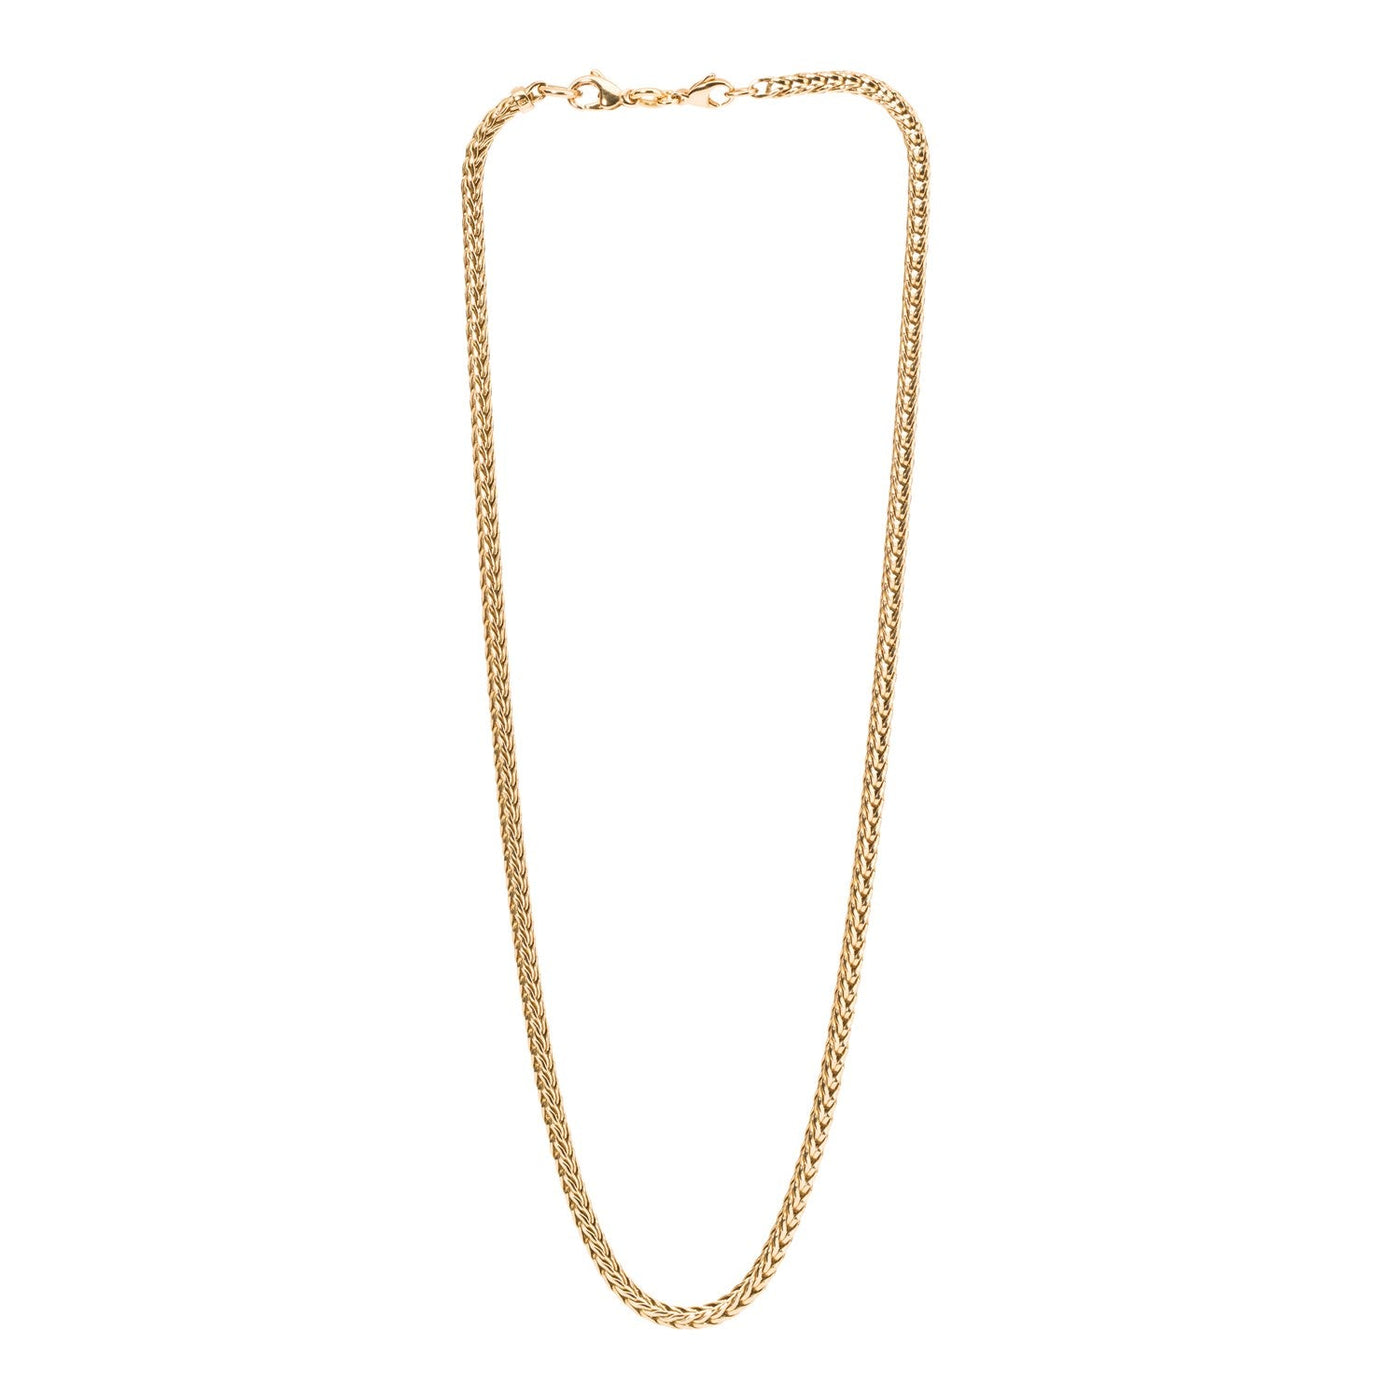 Gold 14 k Necklace with Basic Lock